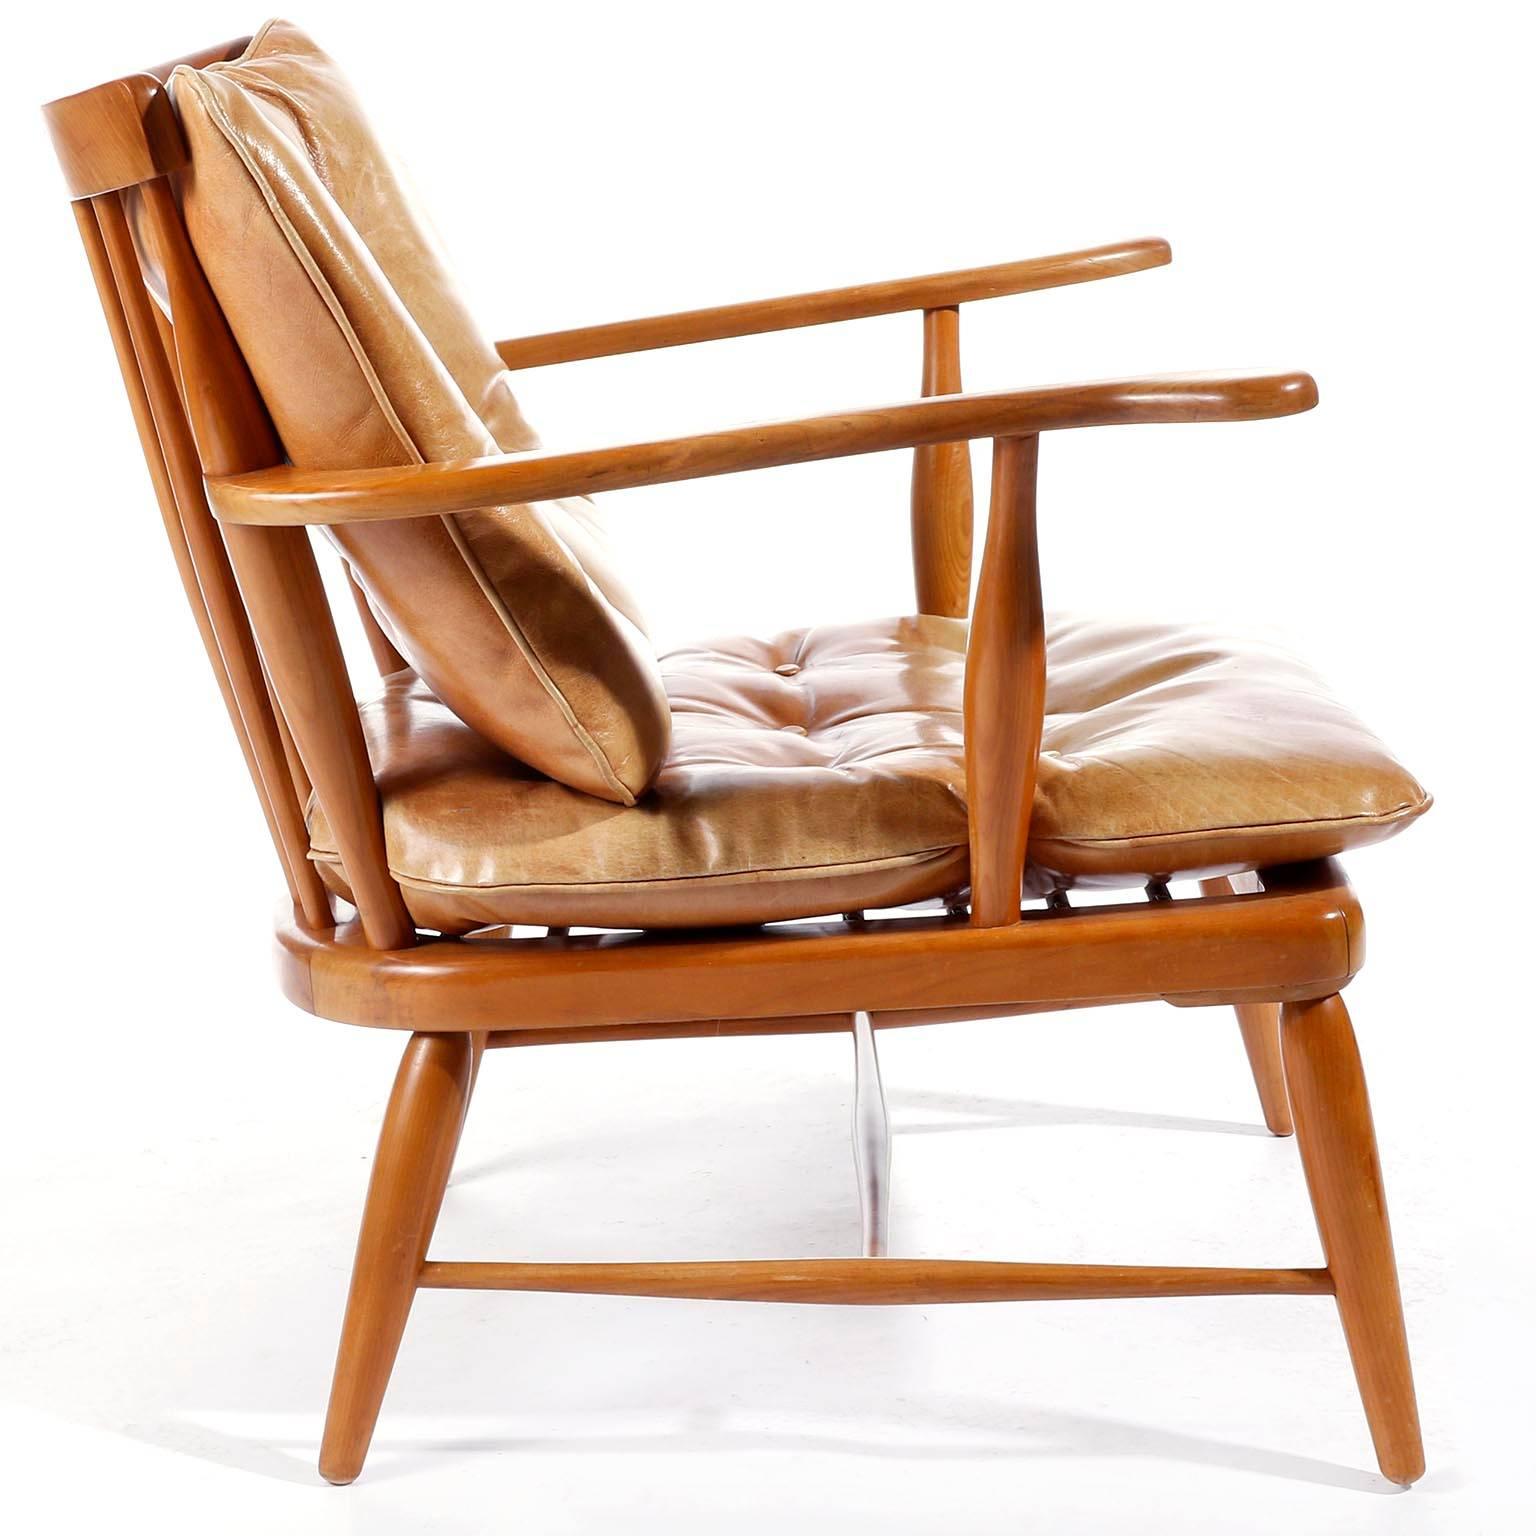 Mid-20th Century Mid-Century Modern, Arm Chair in Wood and Patinated Cognac Leather, 1950 For Sale